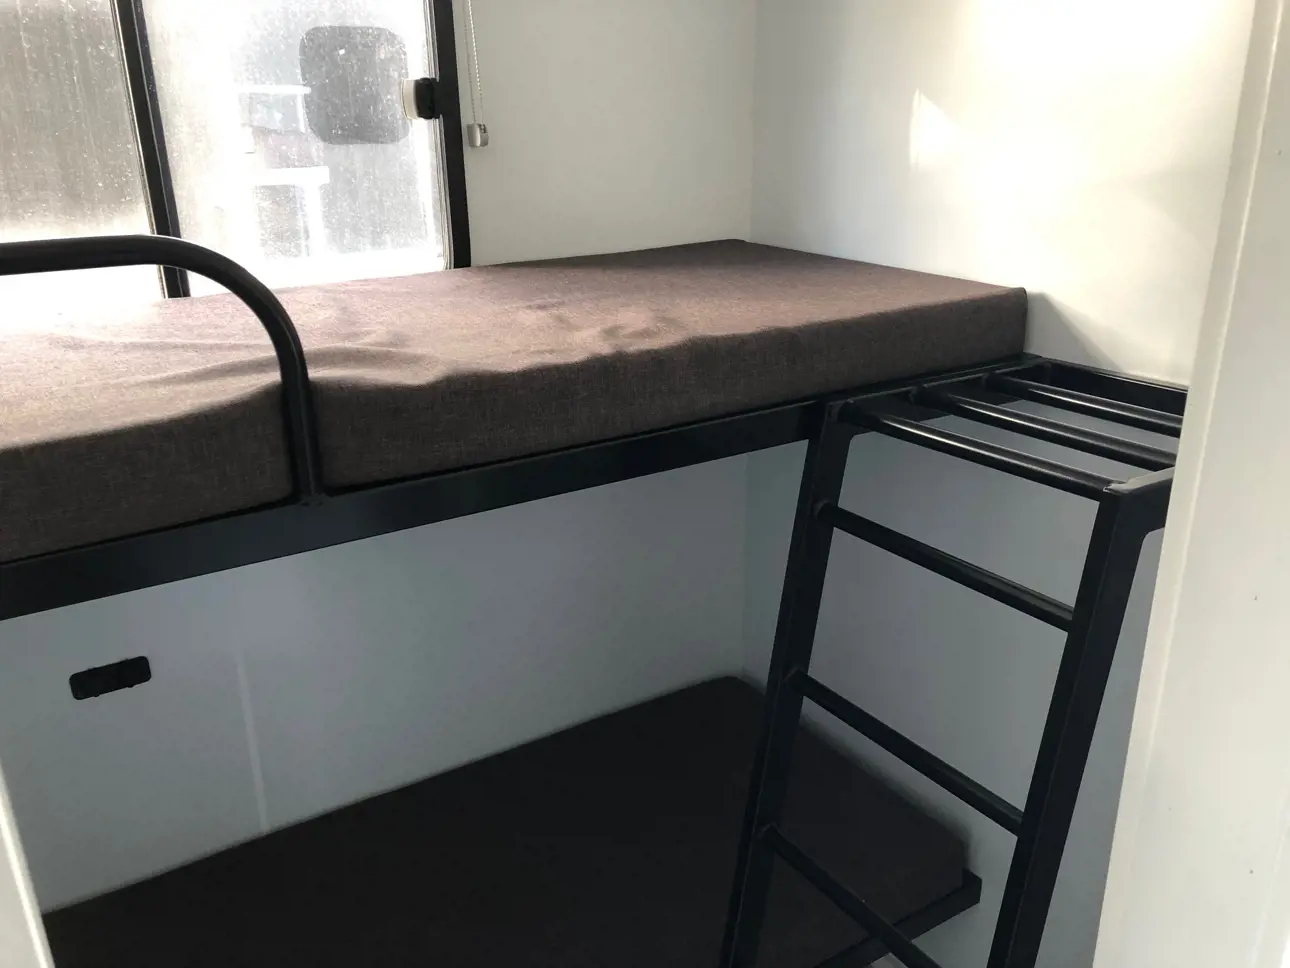 3rd bedroom with two single bunks